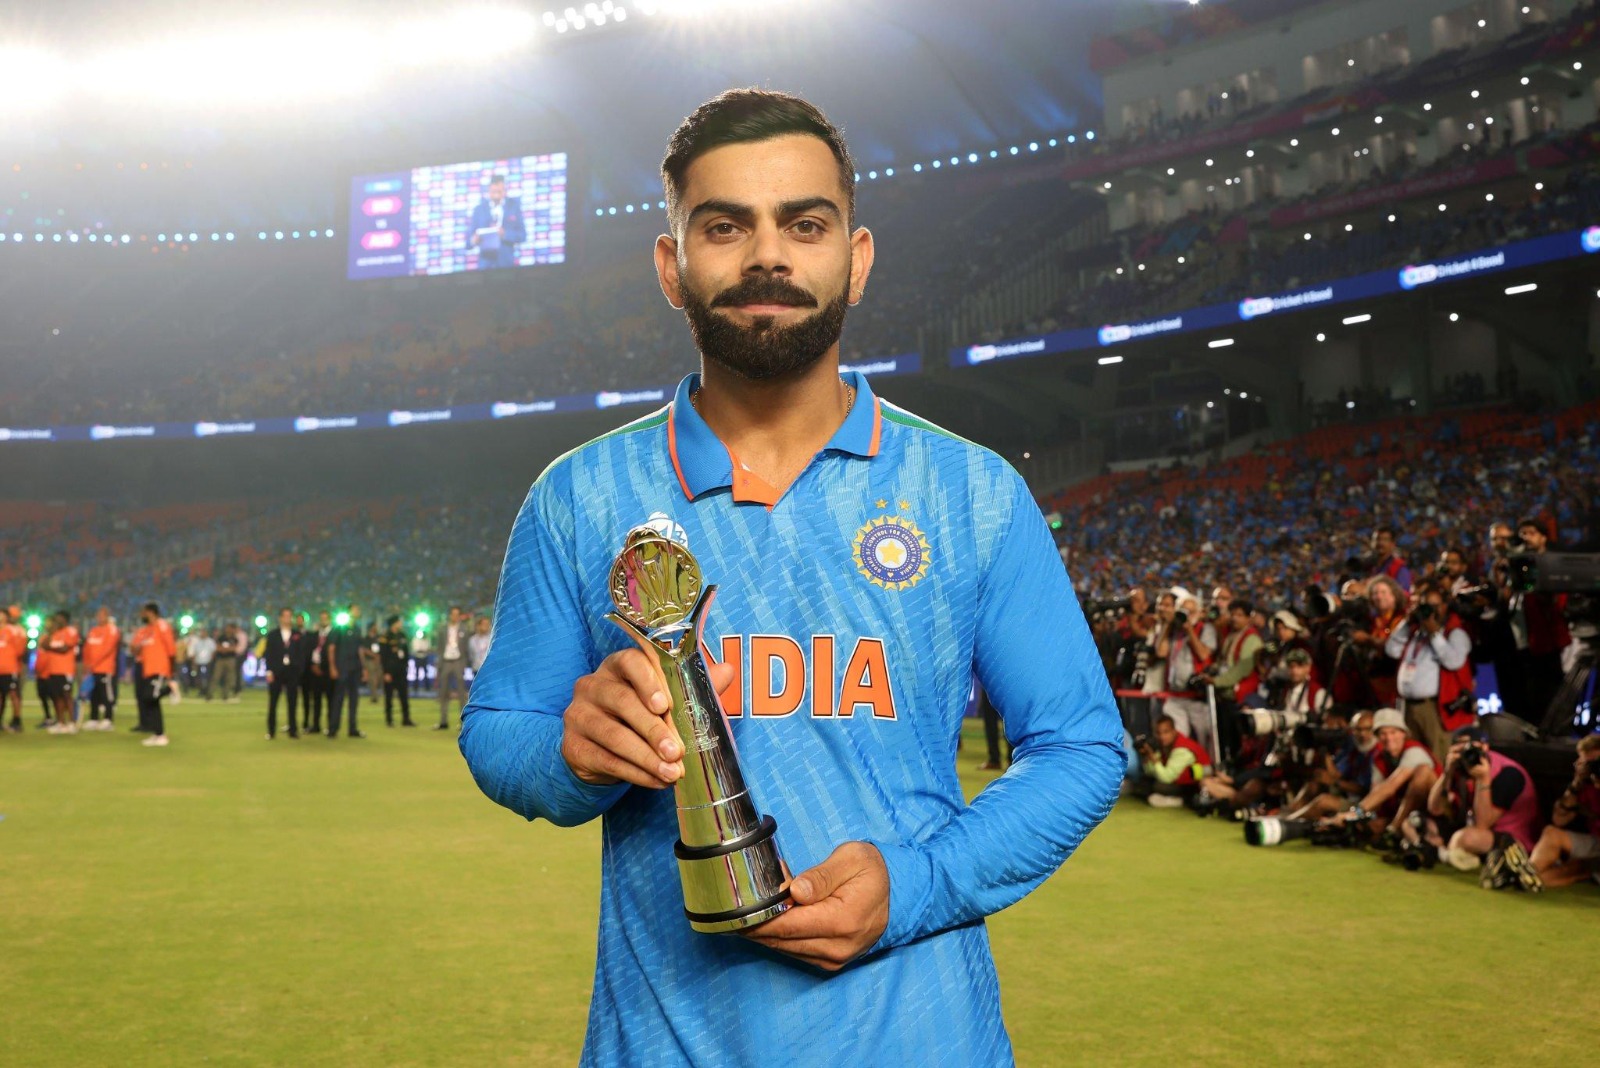 Virat Kohli wins ICC world Cup Player of the tournament, Travis Head wins Man of the Match after century in World Cup Final